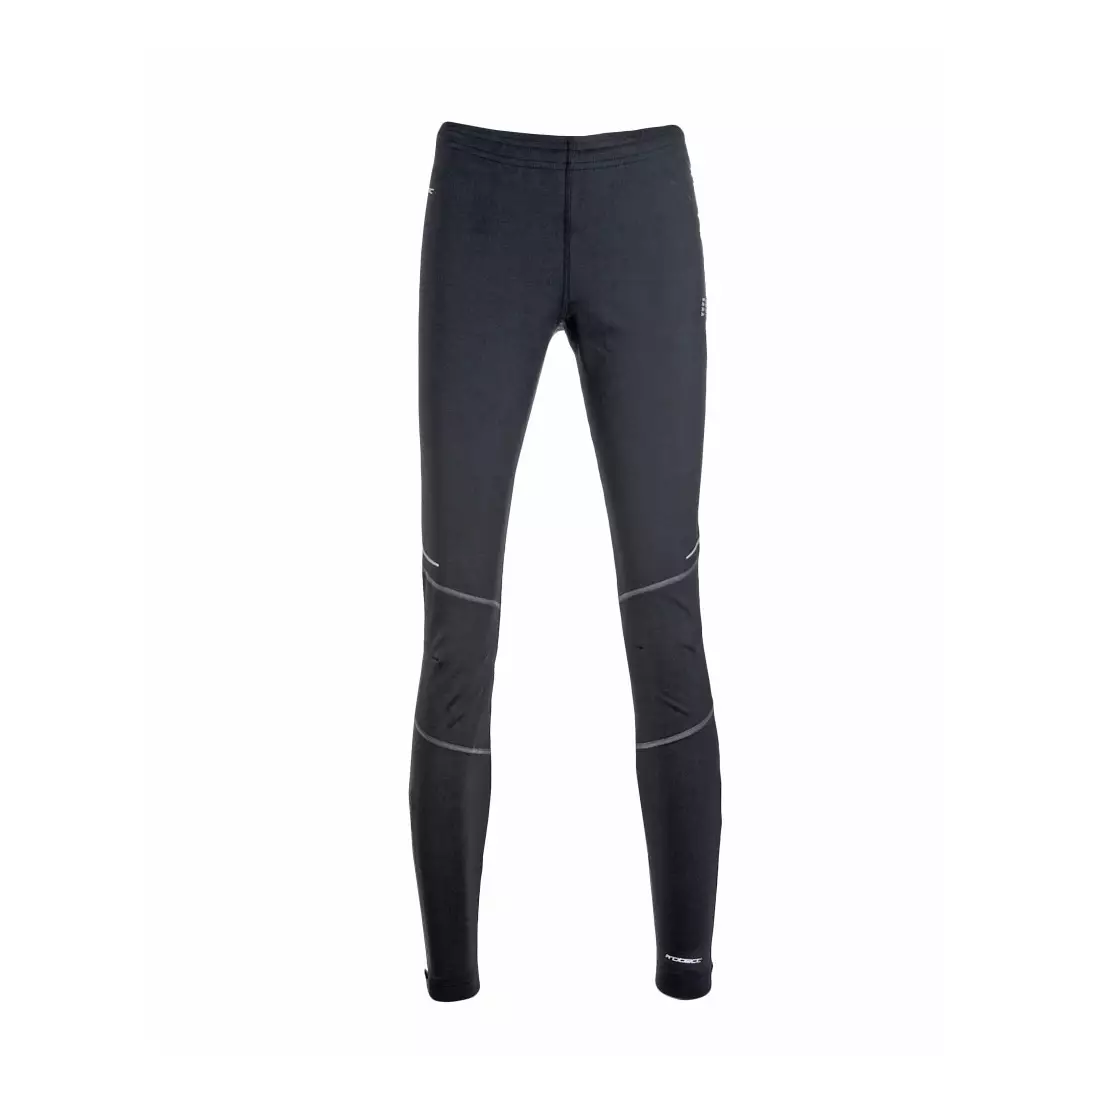 NEWLINE ICONIC PROTECT TIGHTS 10132-060 - women's insulated running pants, color: Black